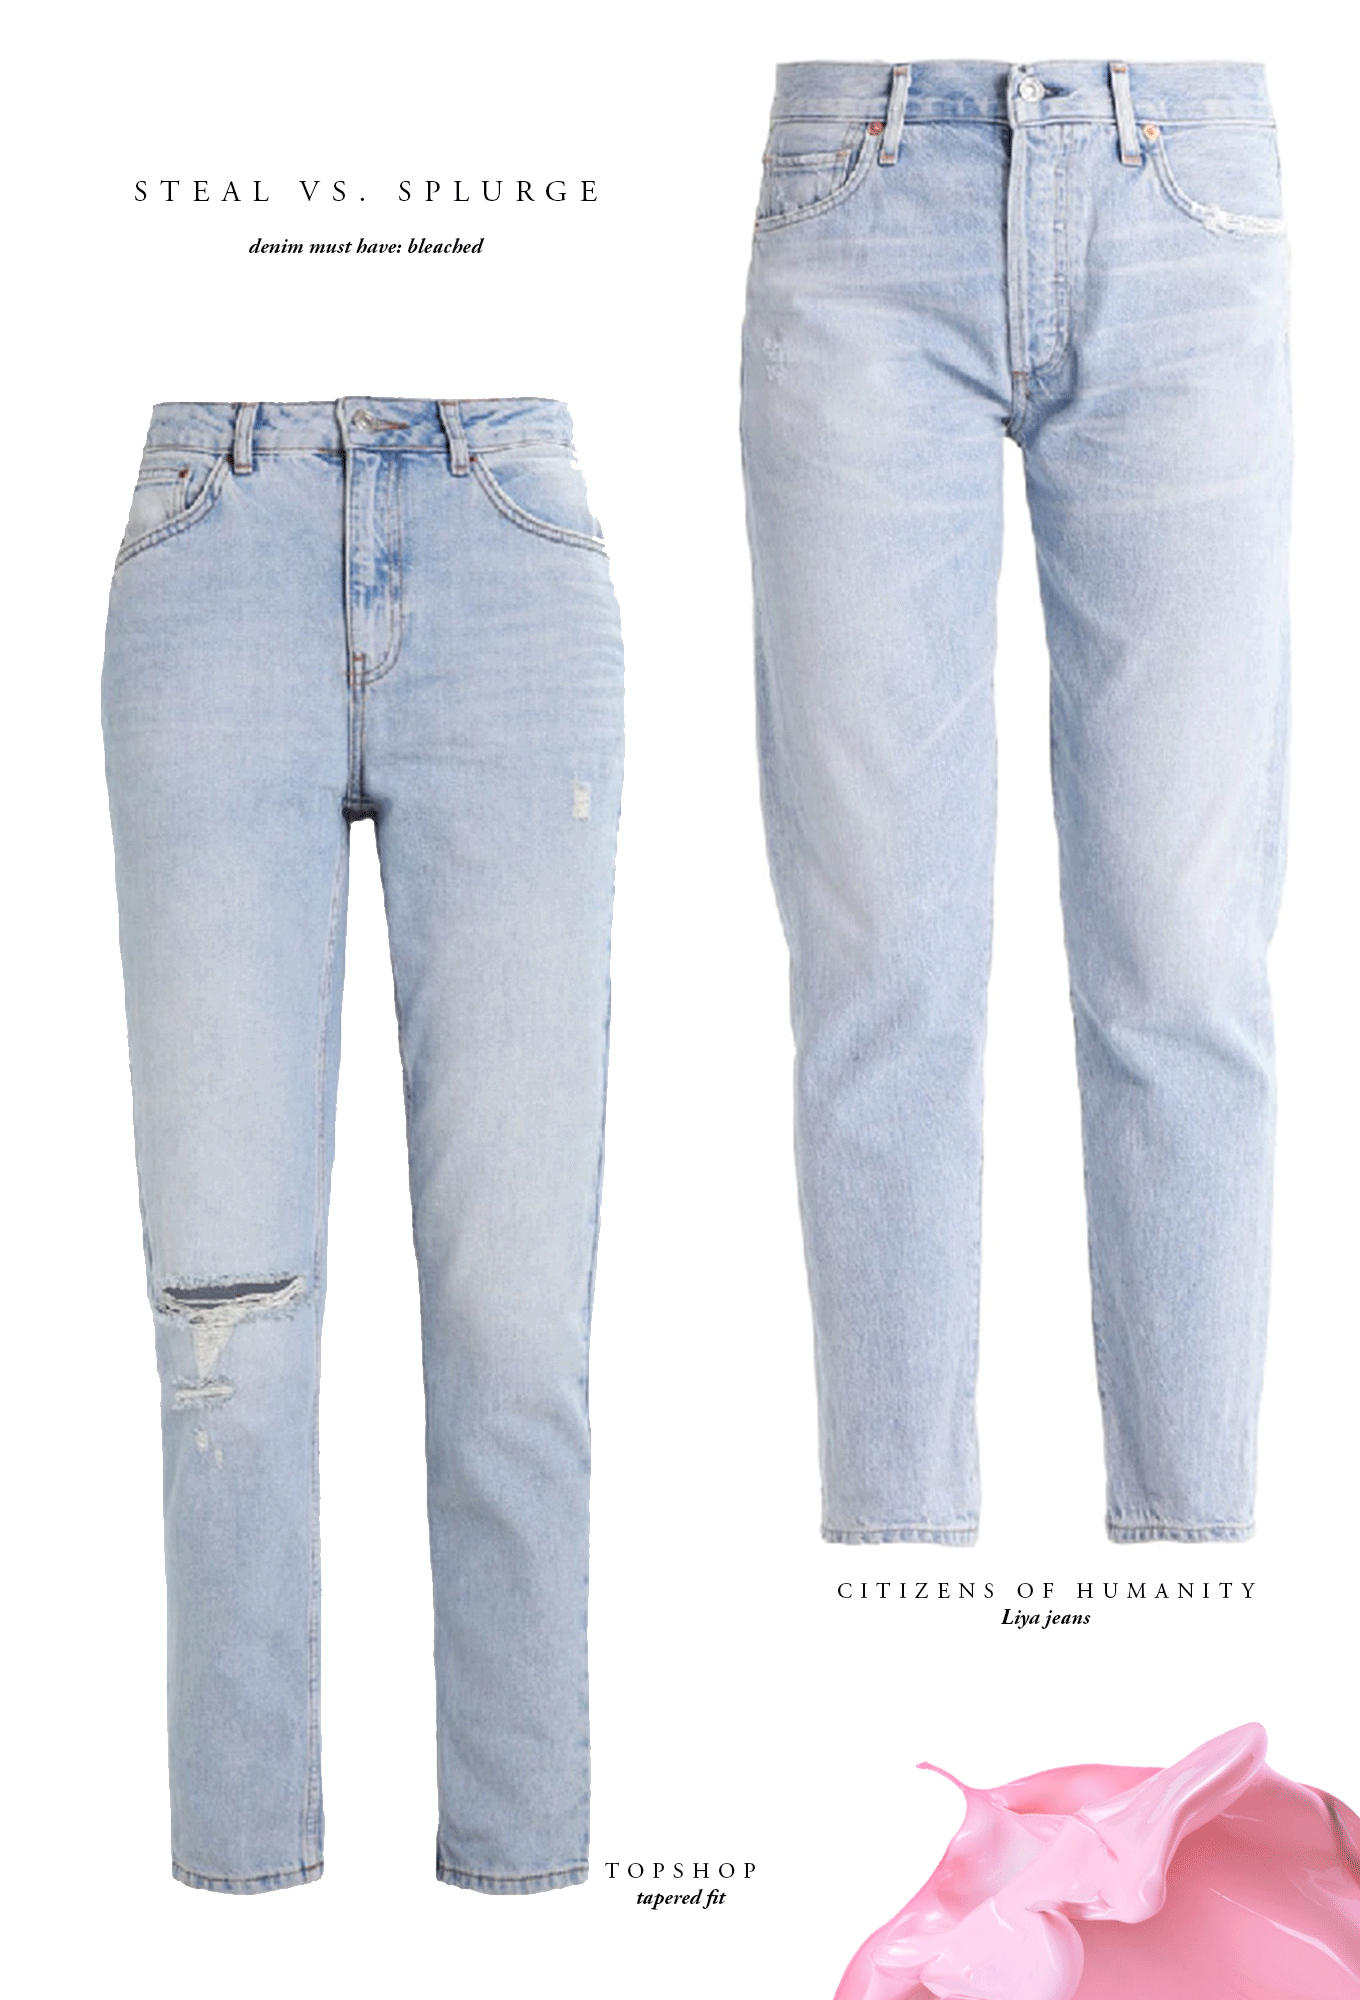 denim must-have: tapered & bleached.